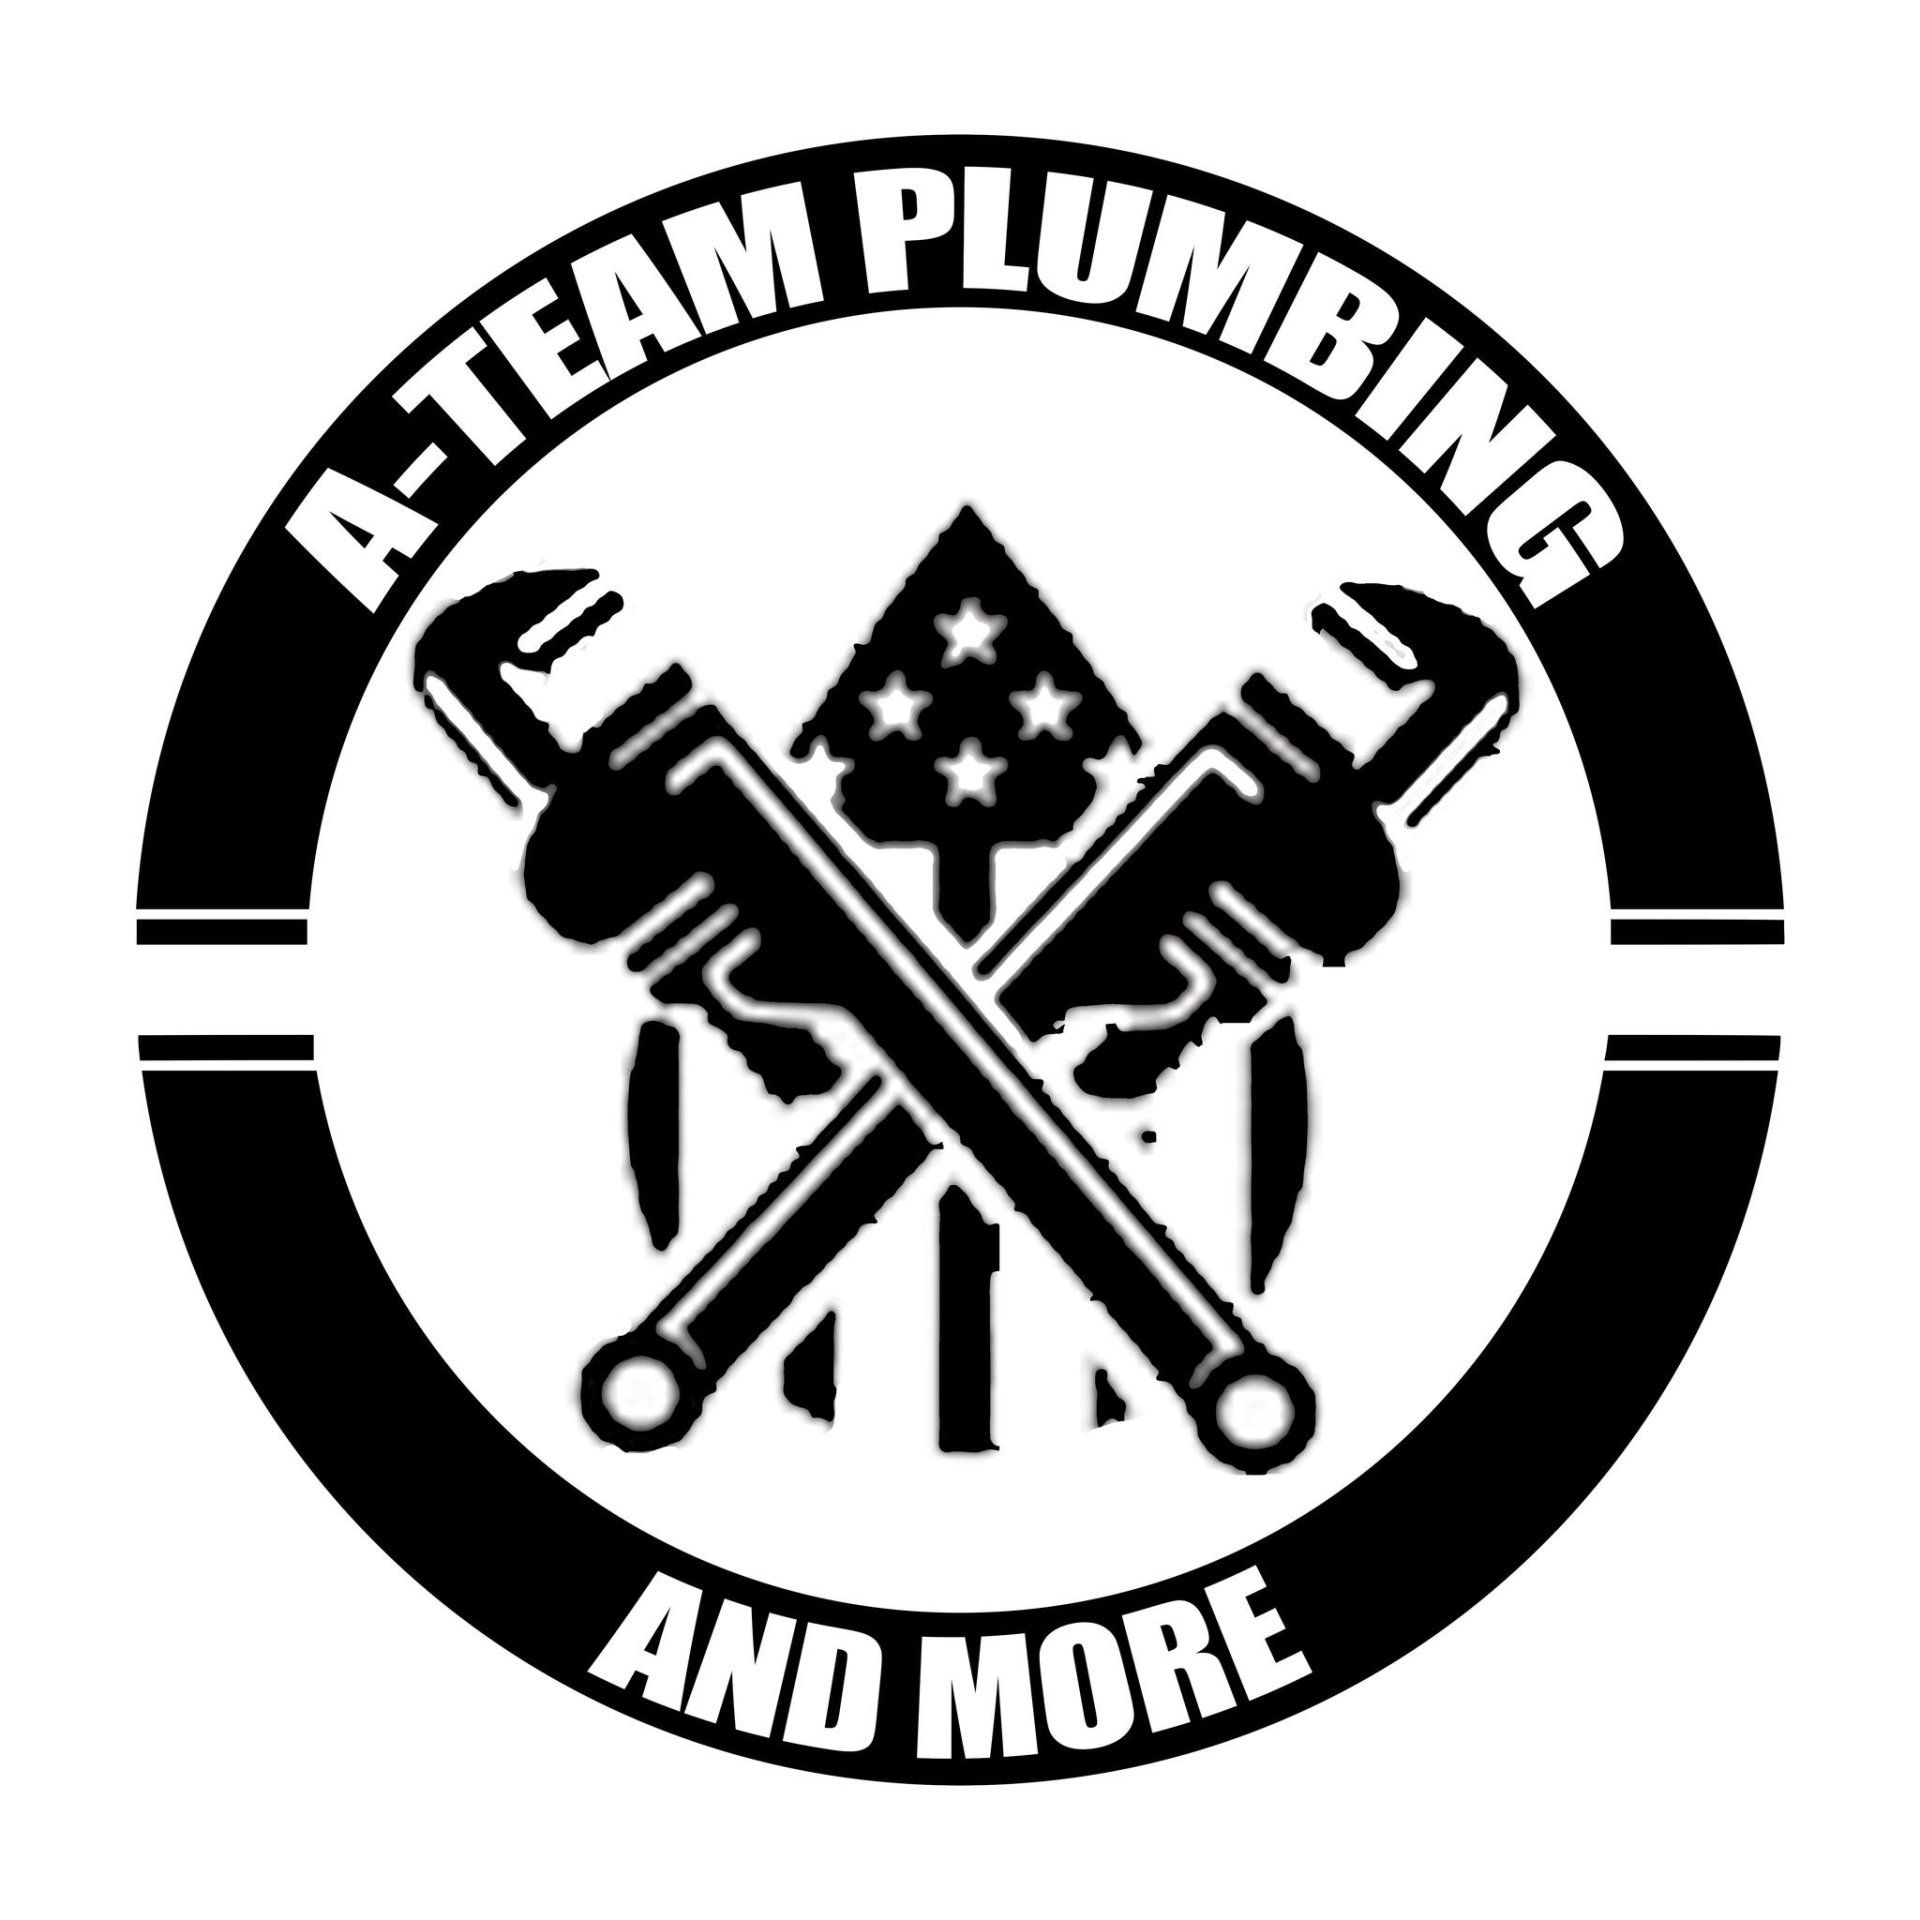 A-Team Plumbing and More LLC | Experienced Plumbers